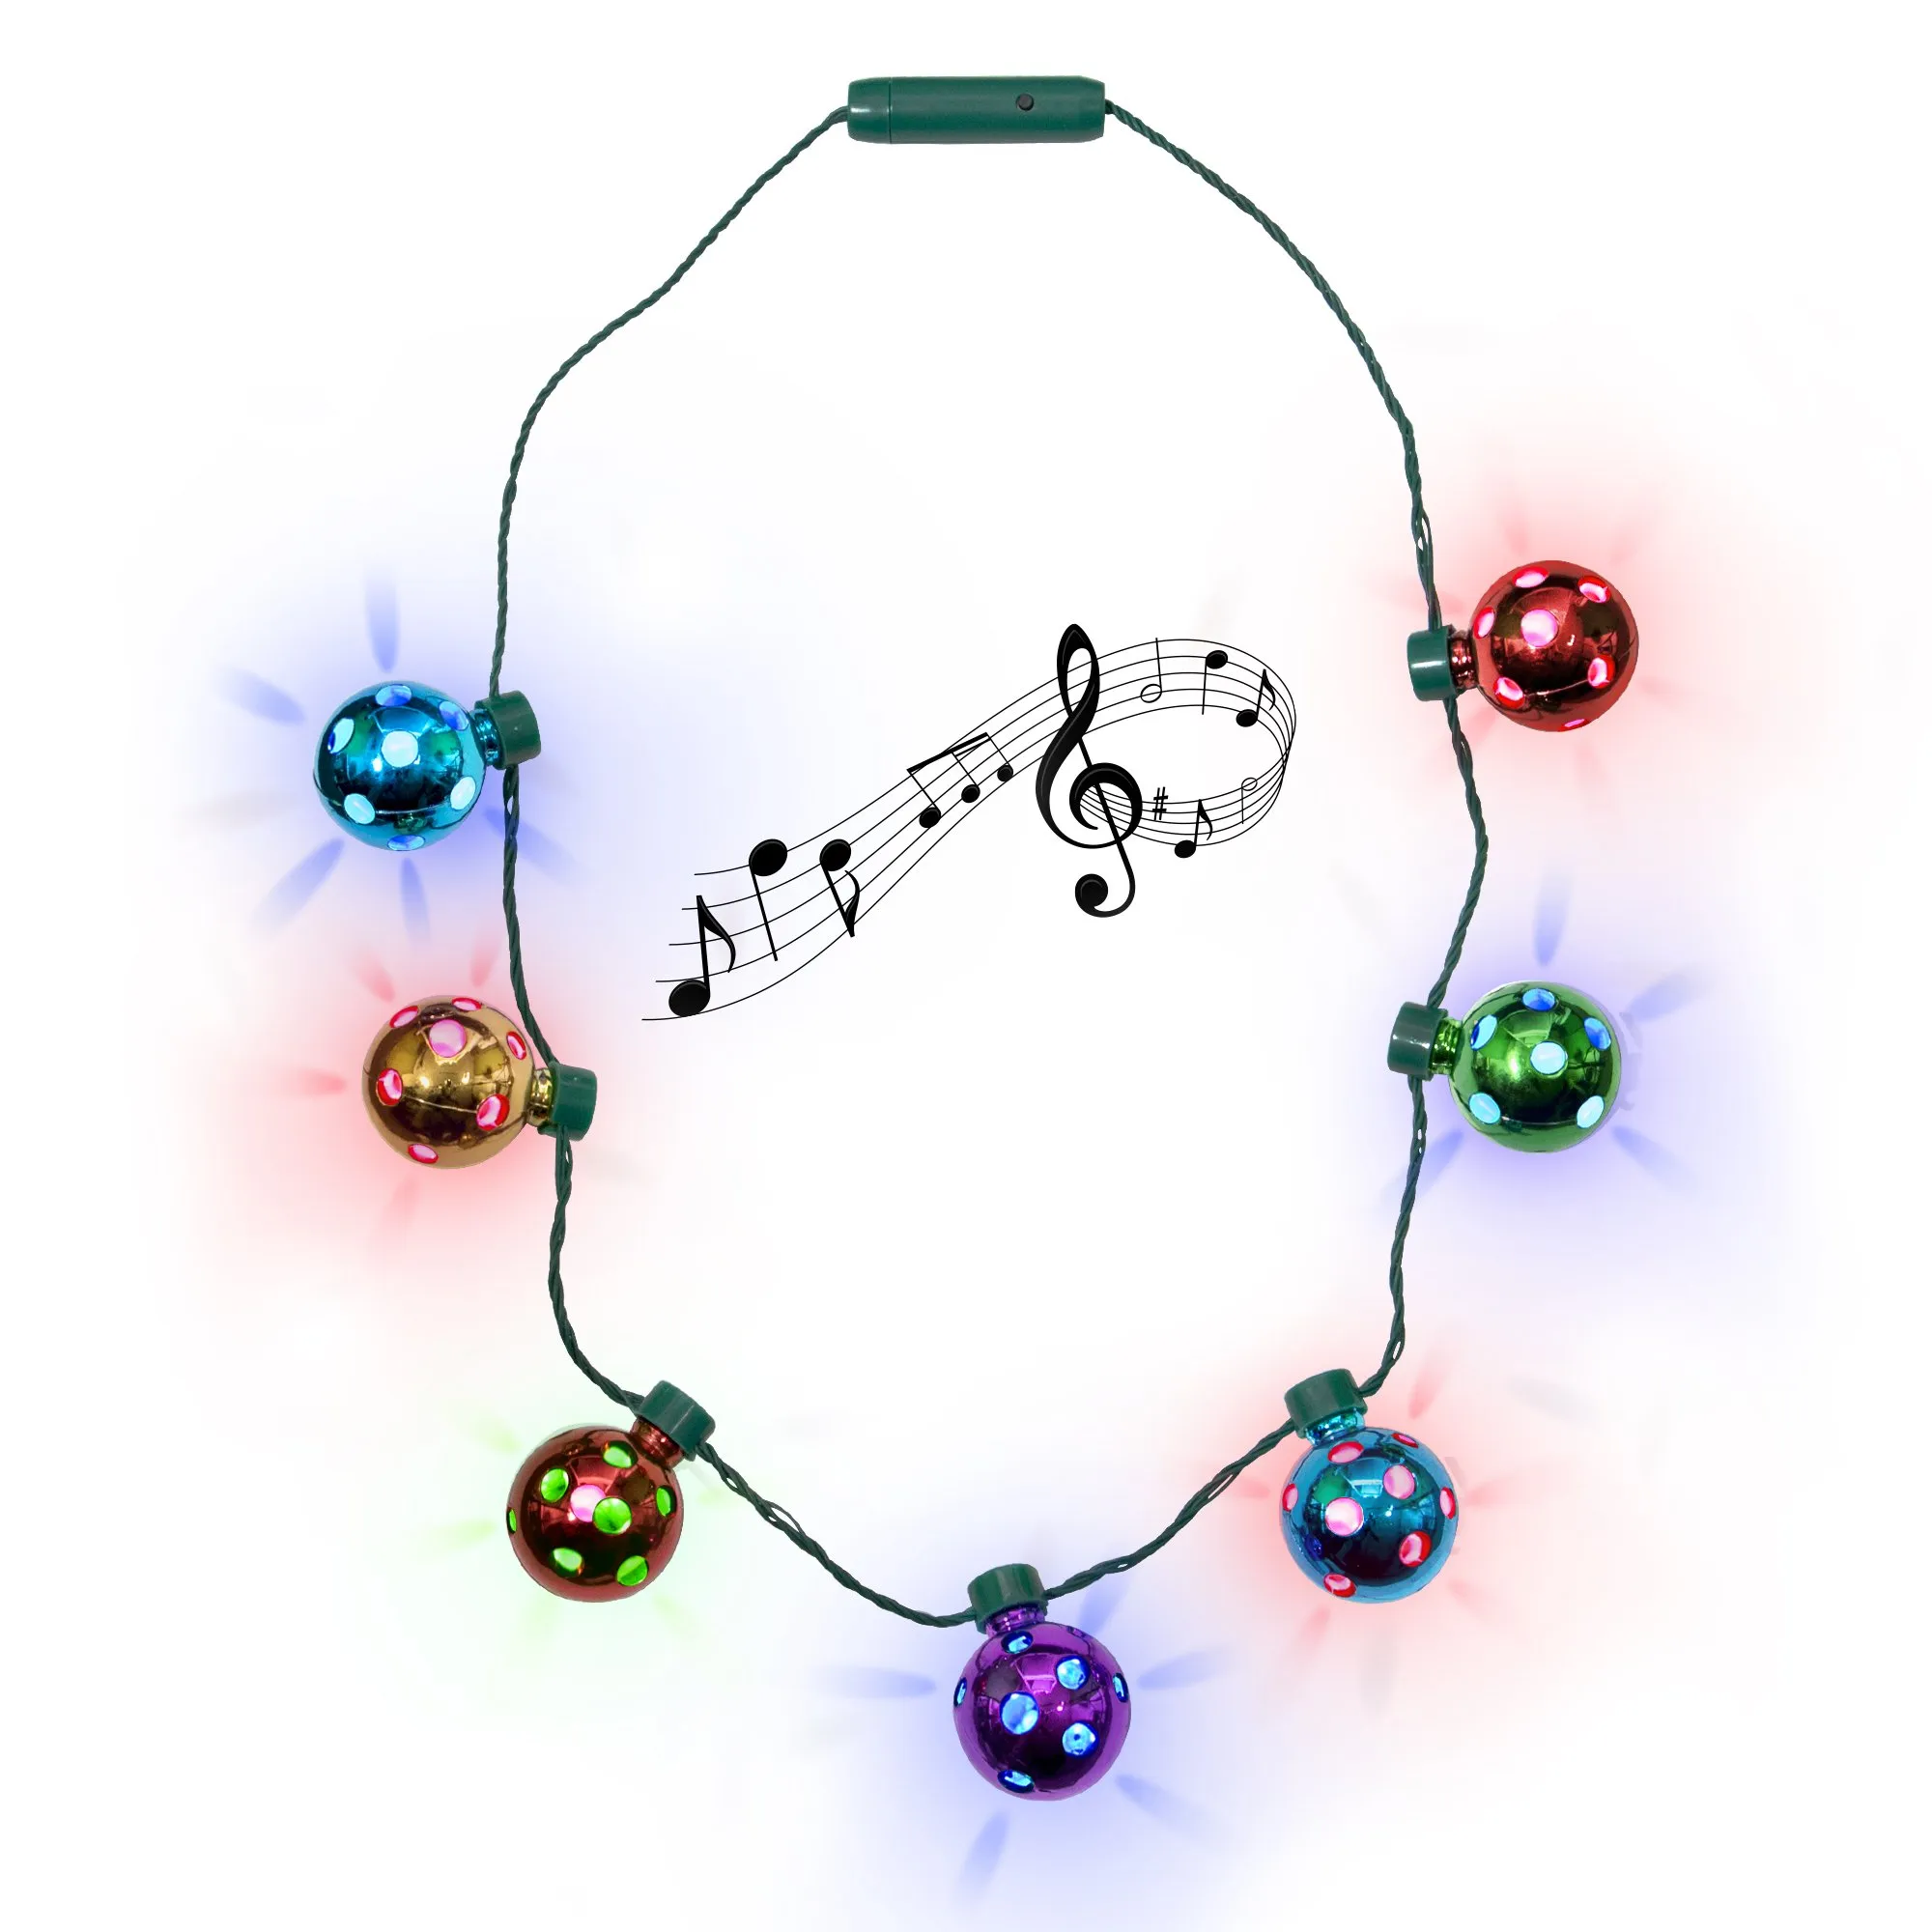 led christmas holiday jingle bell necklace for kids and adults 4